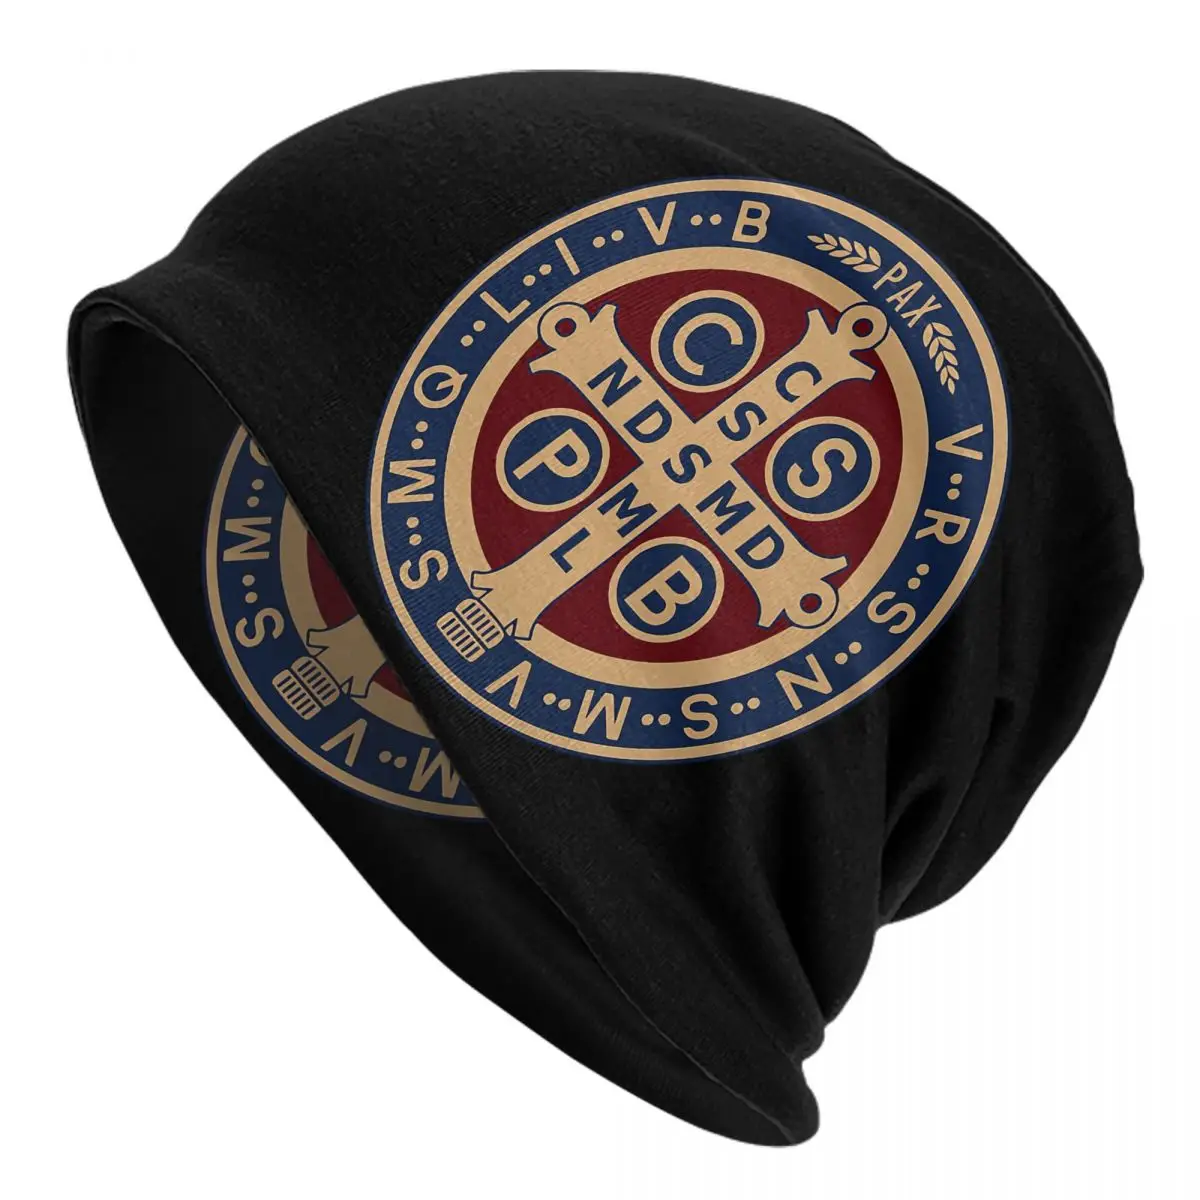 The Medal Of Saint Benedict Adult Men's Women's Knit Hat Keep warm winter knitted hat